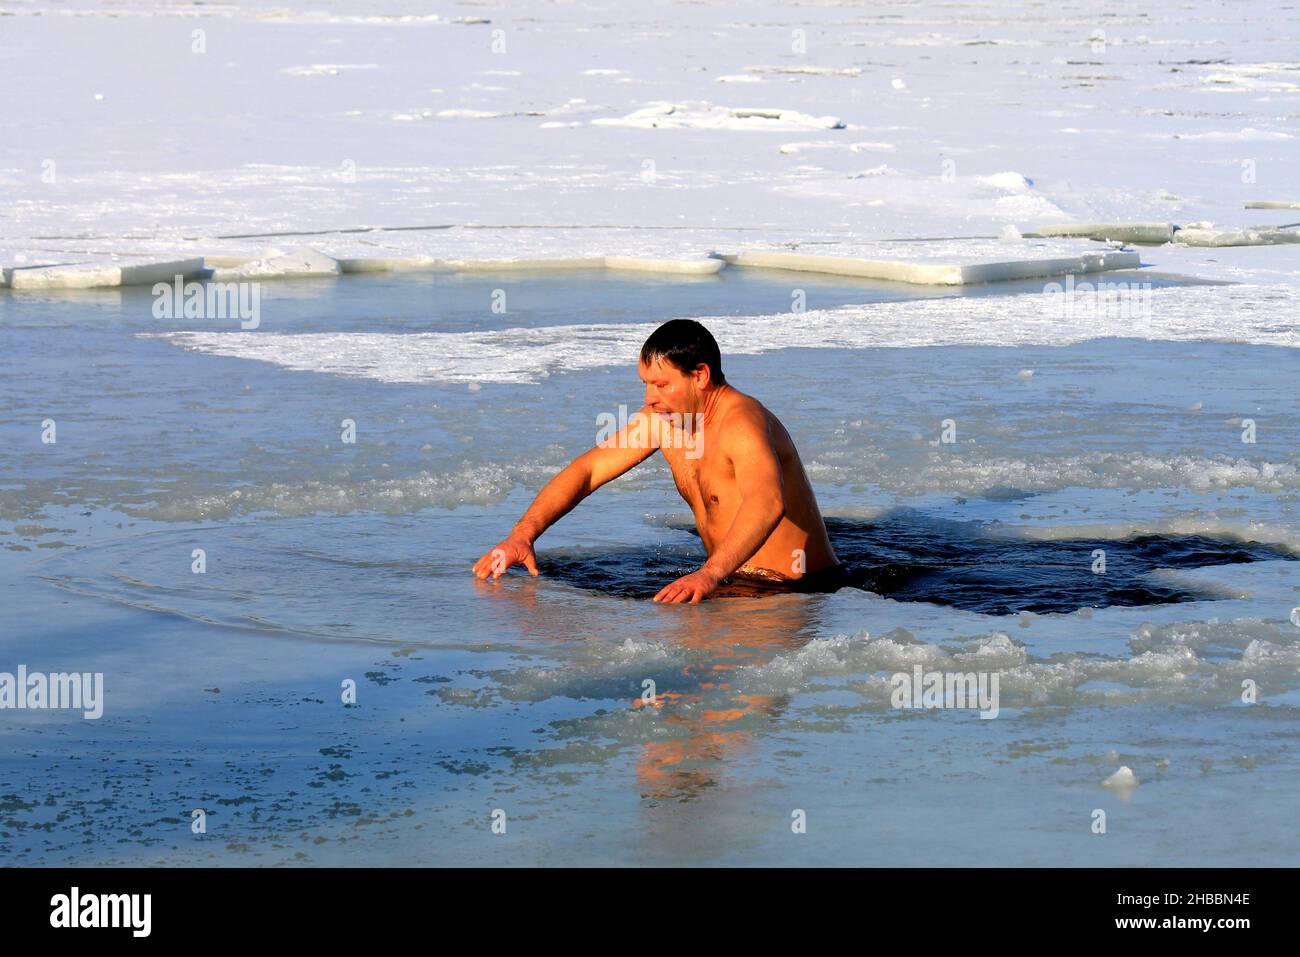 Winter swimming, hardening. Men swim in a river covered with ice during the Orthodox holiday of Epiphany. Winter sport, Dnipro, Ukraine, Dnepr, 2020 Stock Photo